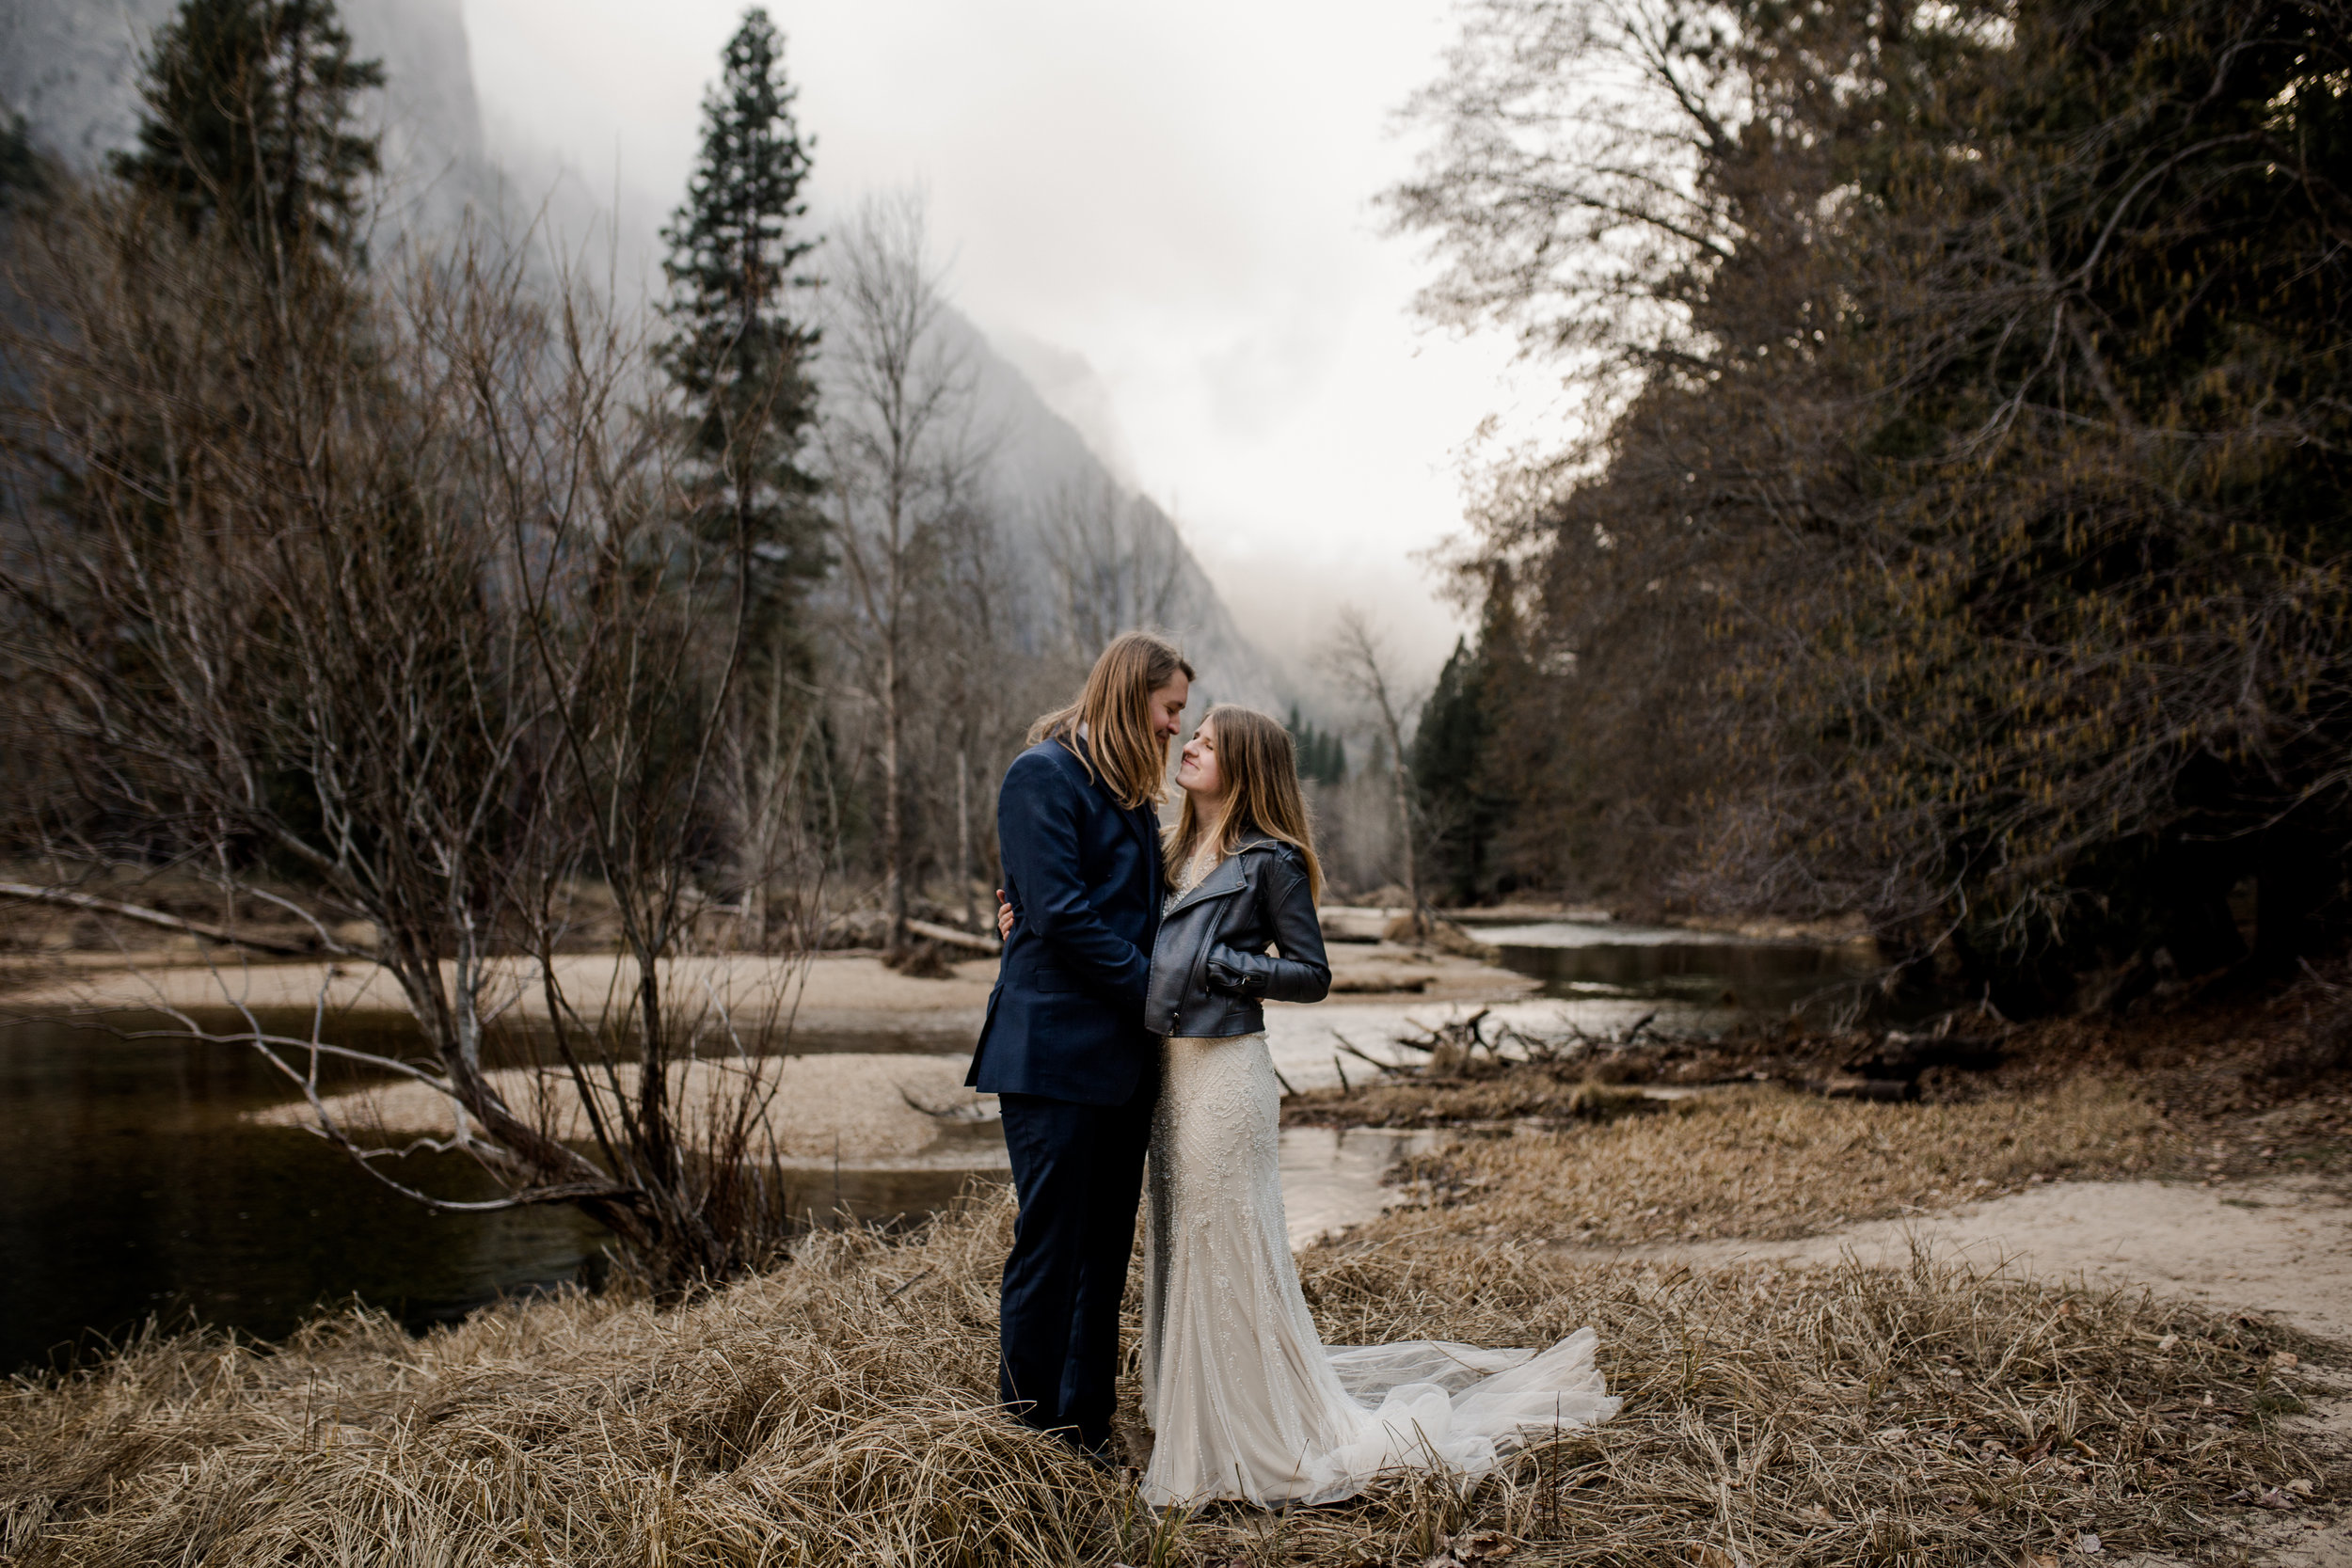 nicole-daacke-photography-yousemite-national-park-elopement-photographer-winter-cloud-moody-elope-inspiration-yosemite-valley-tunnel-view-winter-cloud-fog-weather-wedding-photos-48.jpg